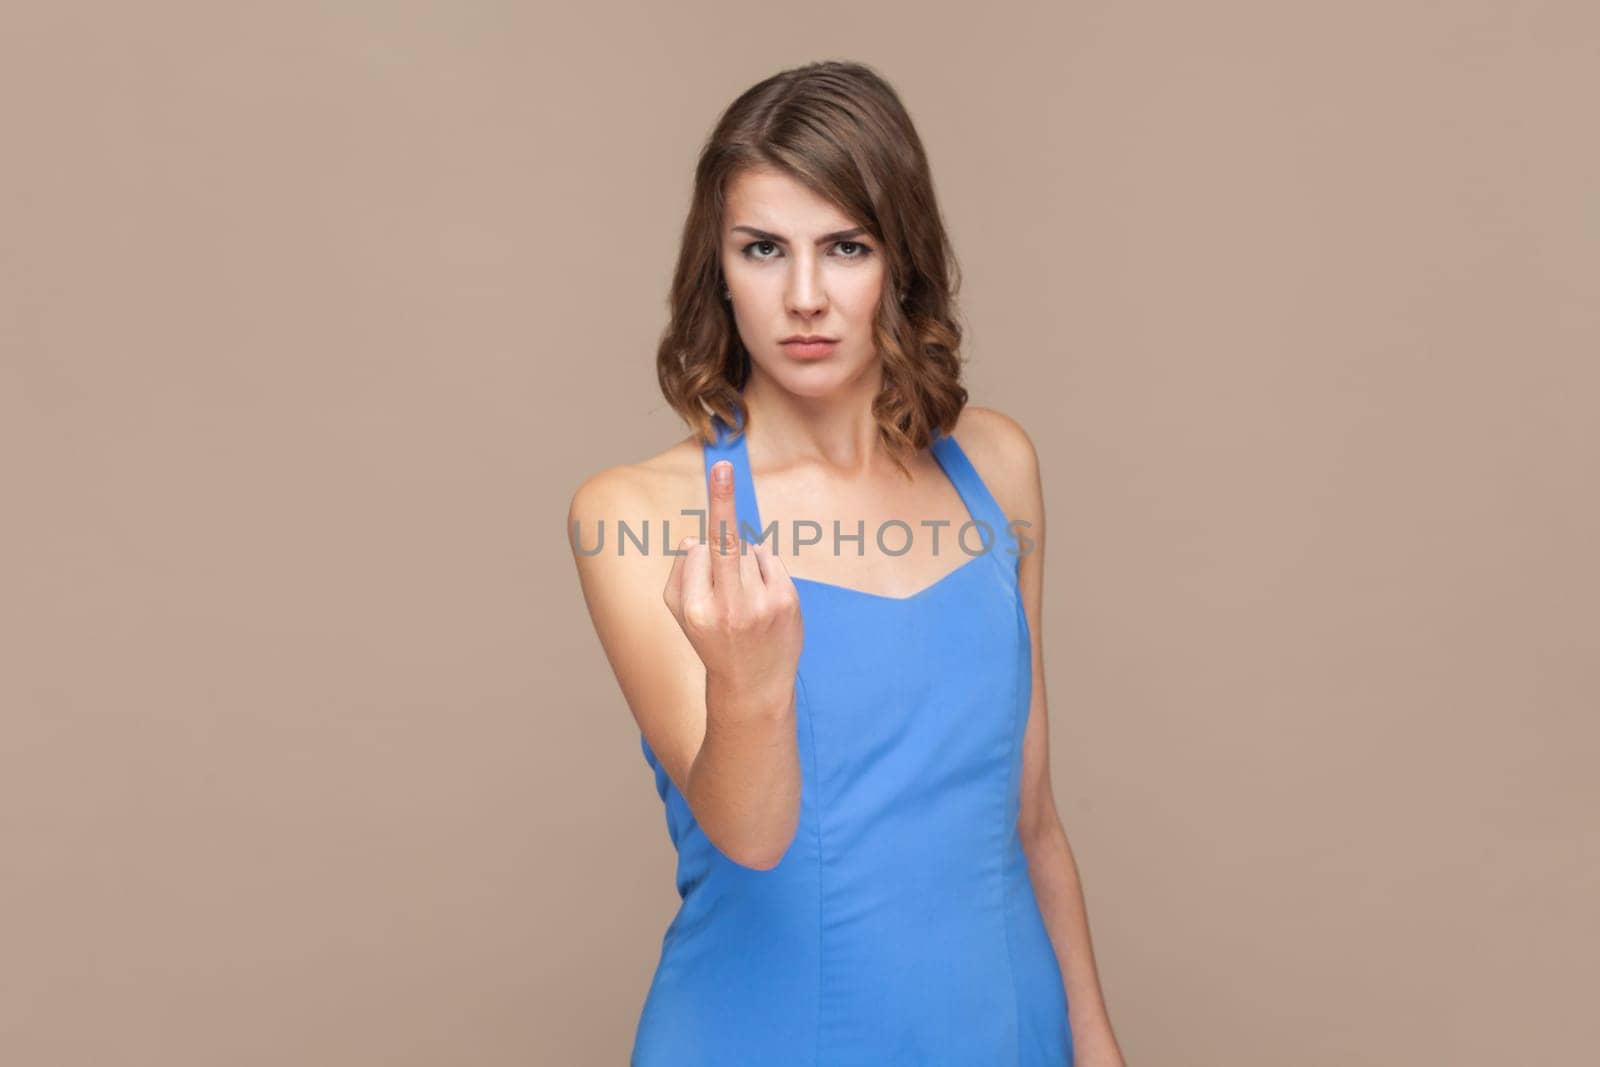 Portrait of displeased woman with wavy hair showing fuck sign, showing her negative feeling, looking at camera, wearing blue dress. Indoor studio shot isolated on light brown background.